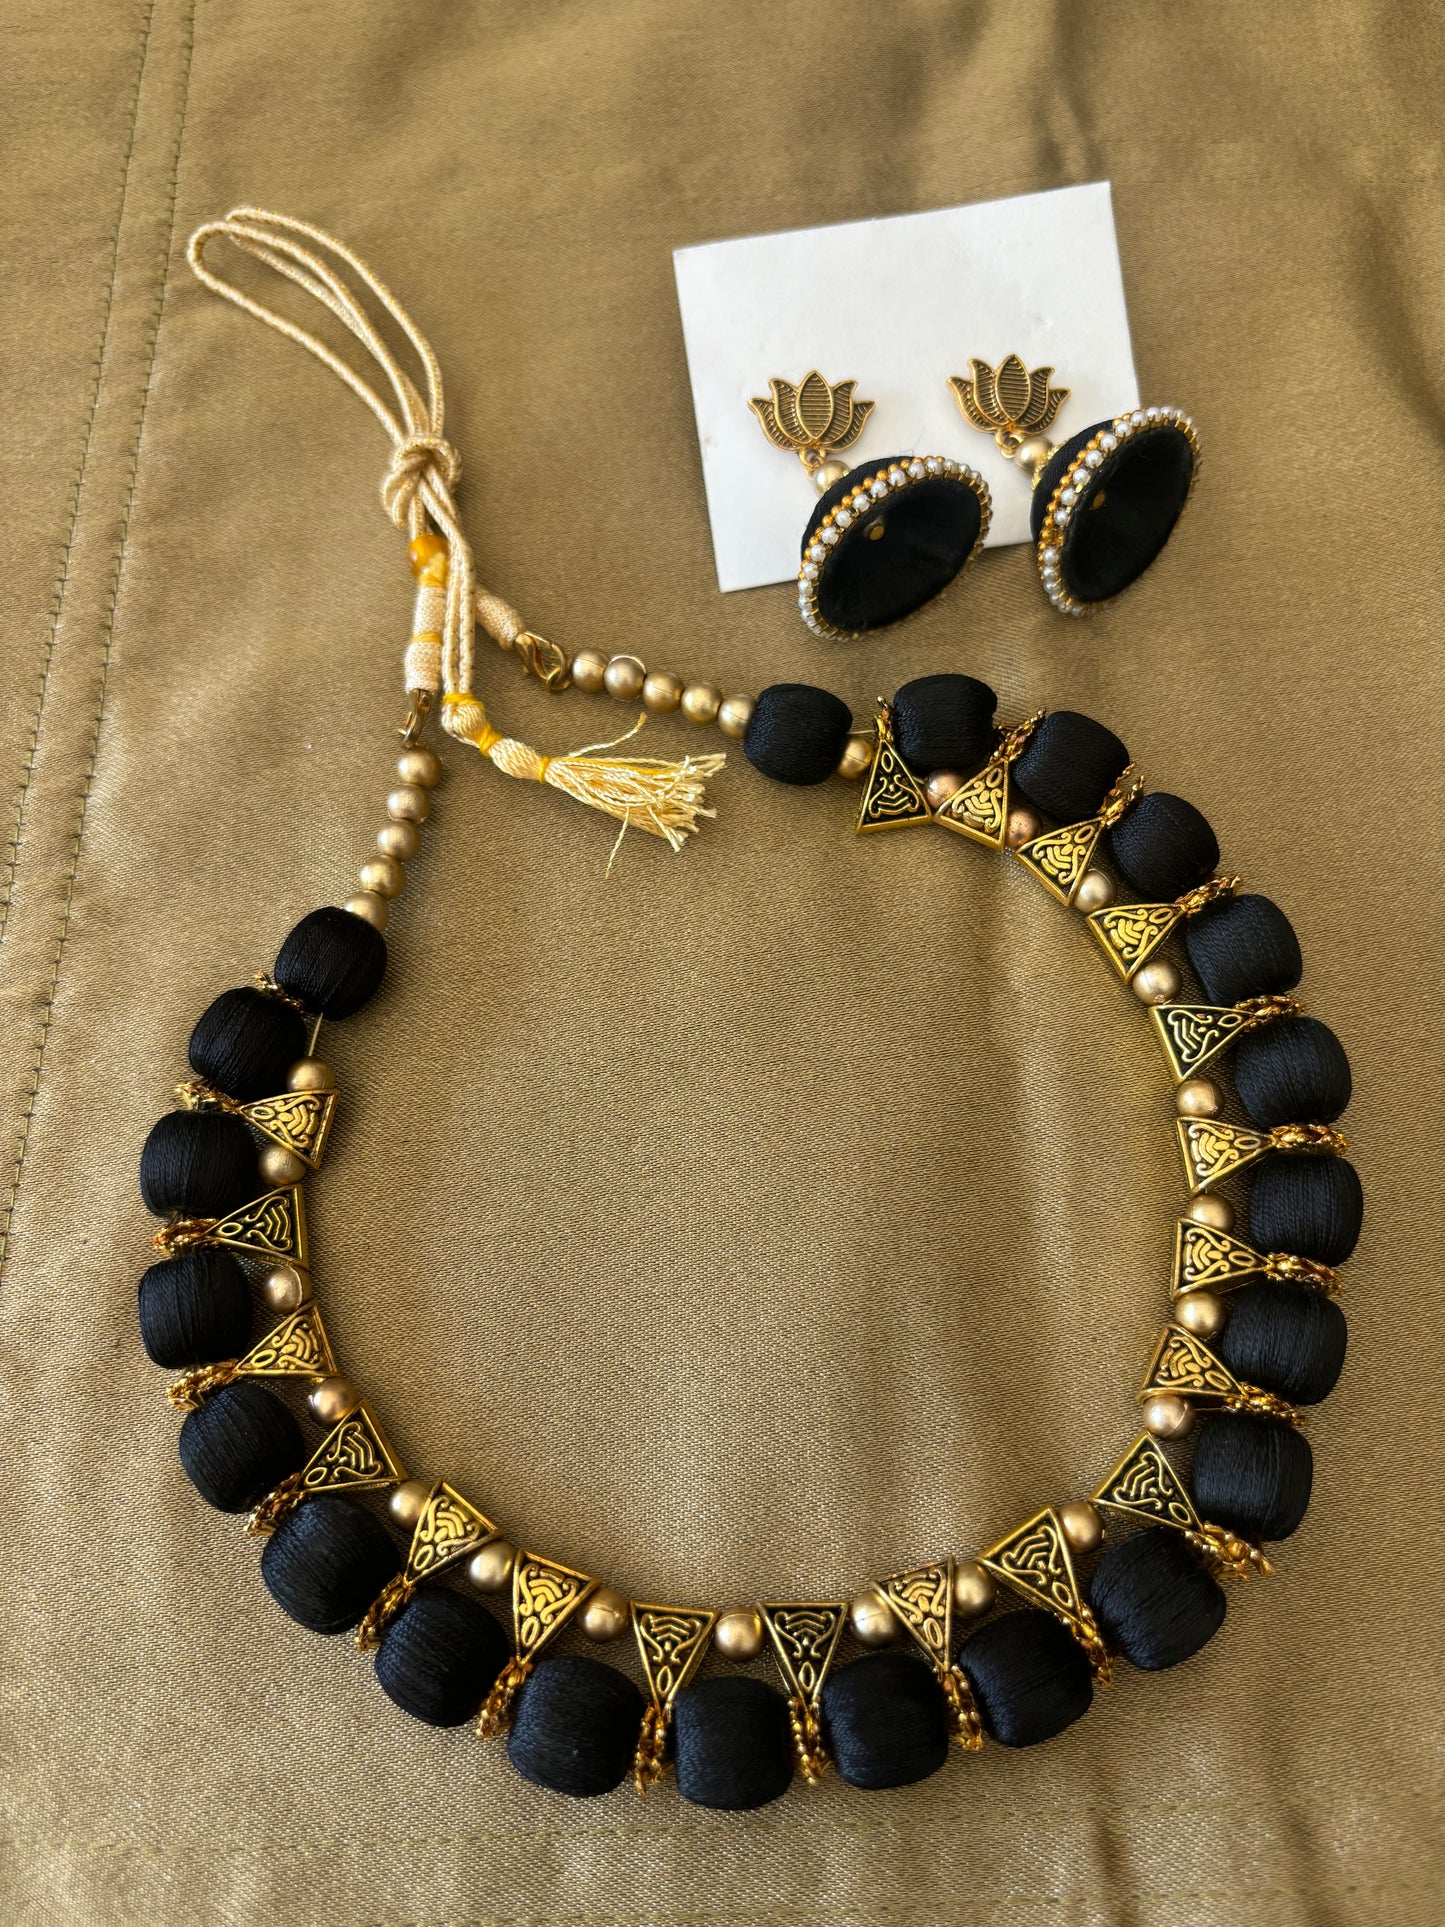 Threadwork necklace set with single colour beads - black